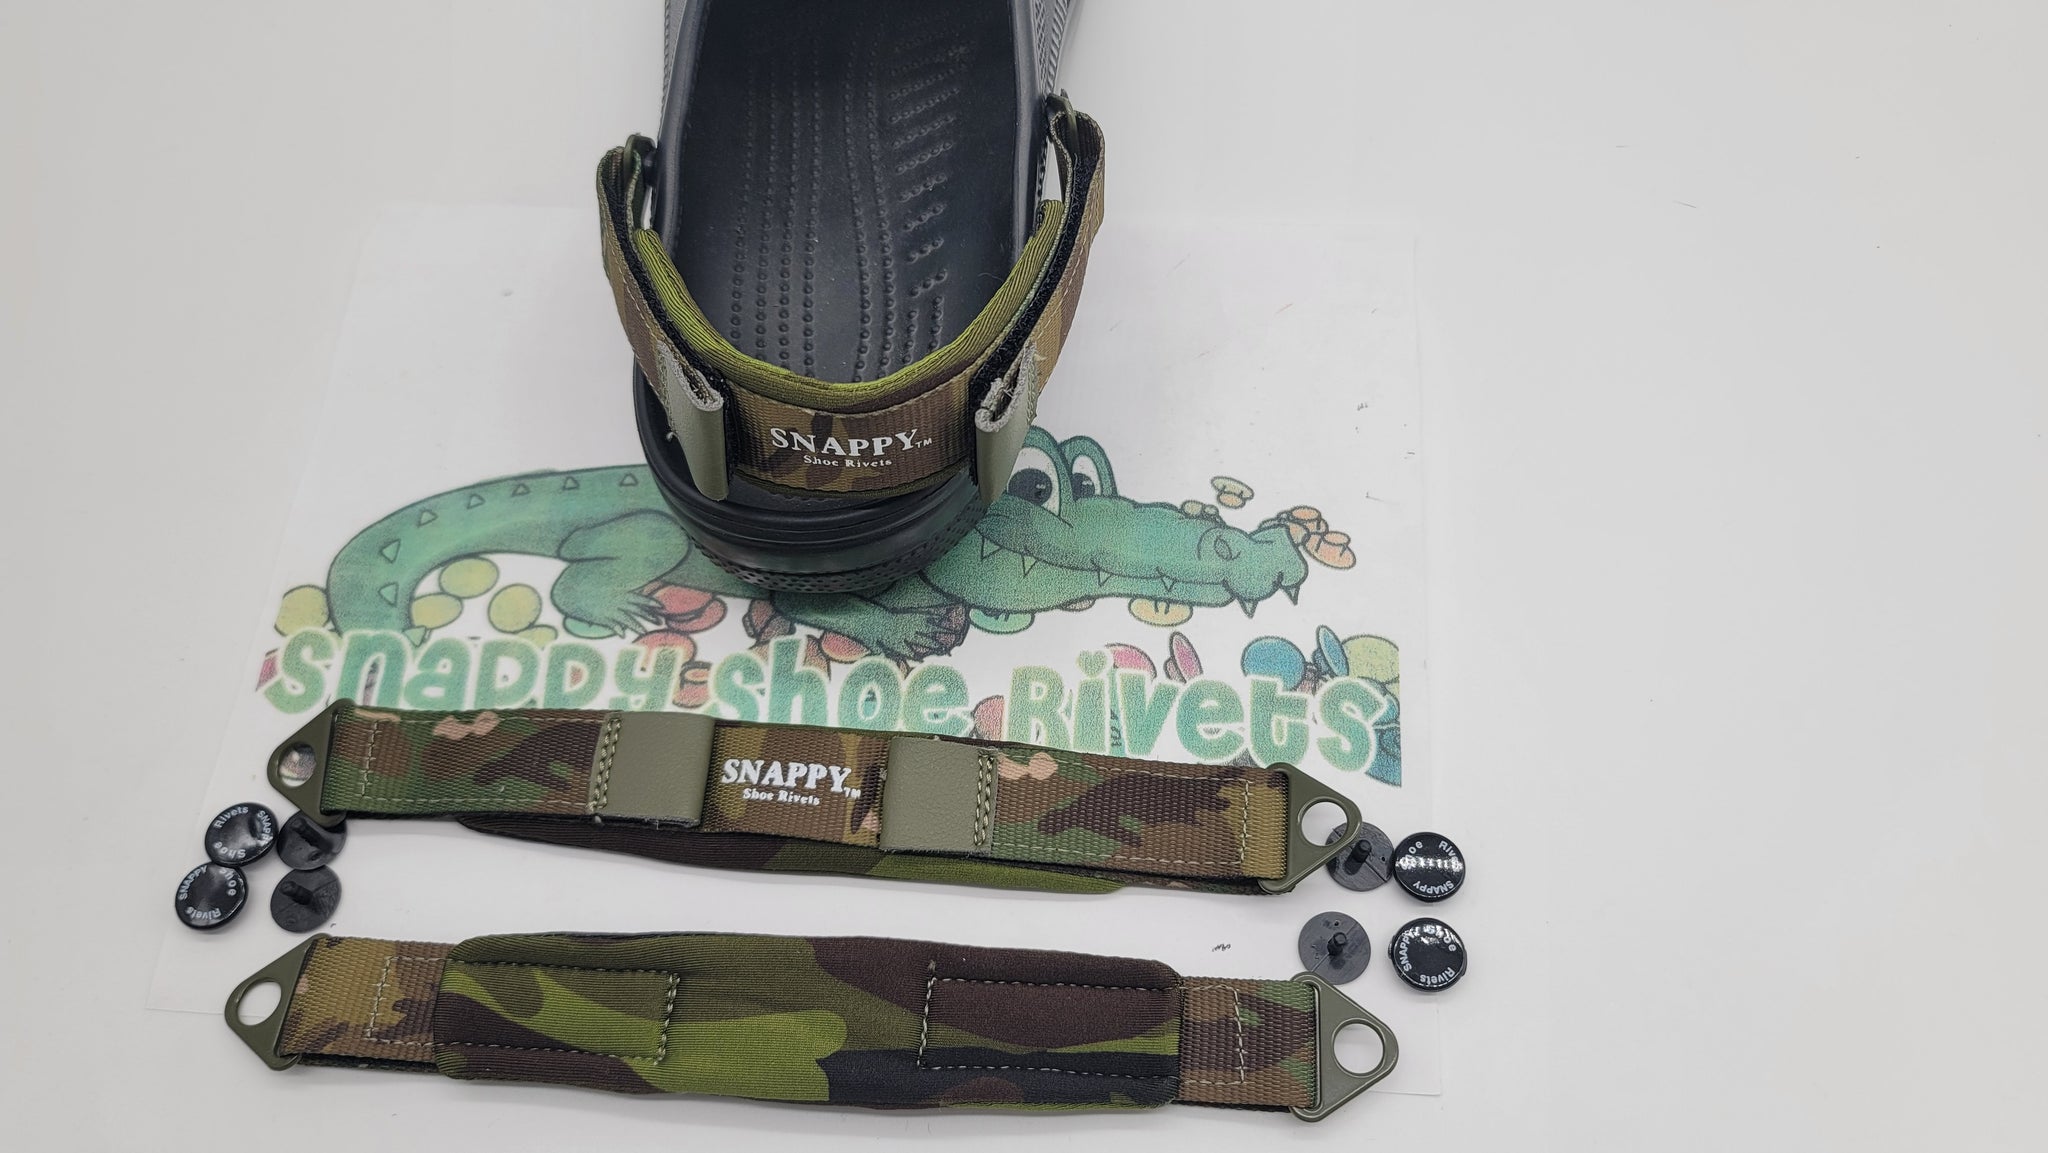  Snappy Shoe Rivets Adjustable Soft Replacement Heel Straps for  croc shoes CAMO : Clothing, Shoes & Jewelry